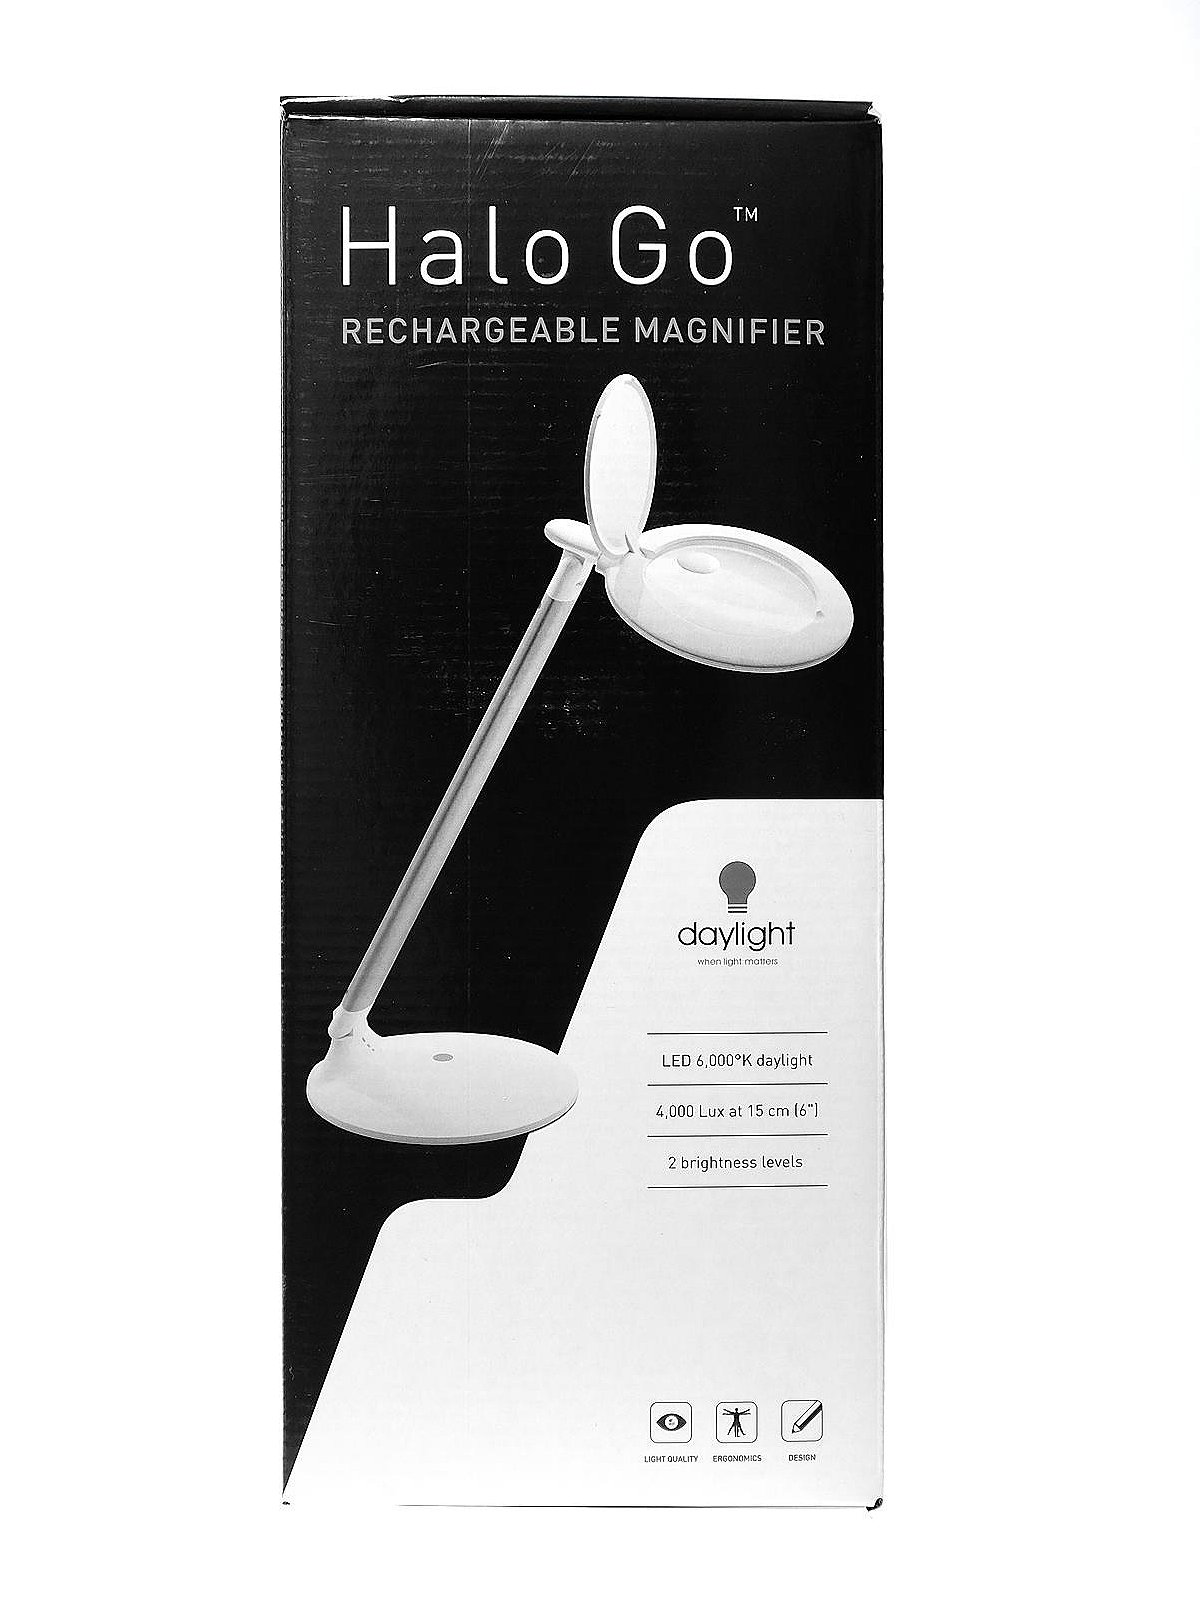 Daylight Halo GO Rechargeable Magnifier Lamp MisterArt.com